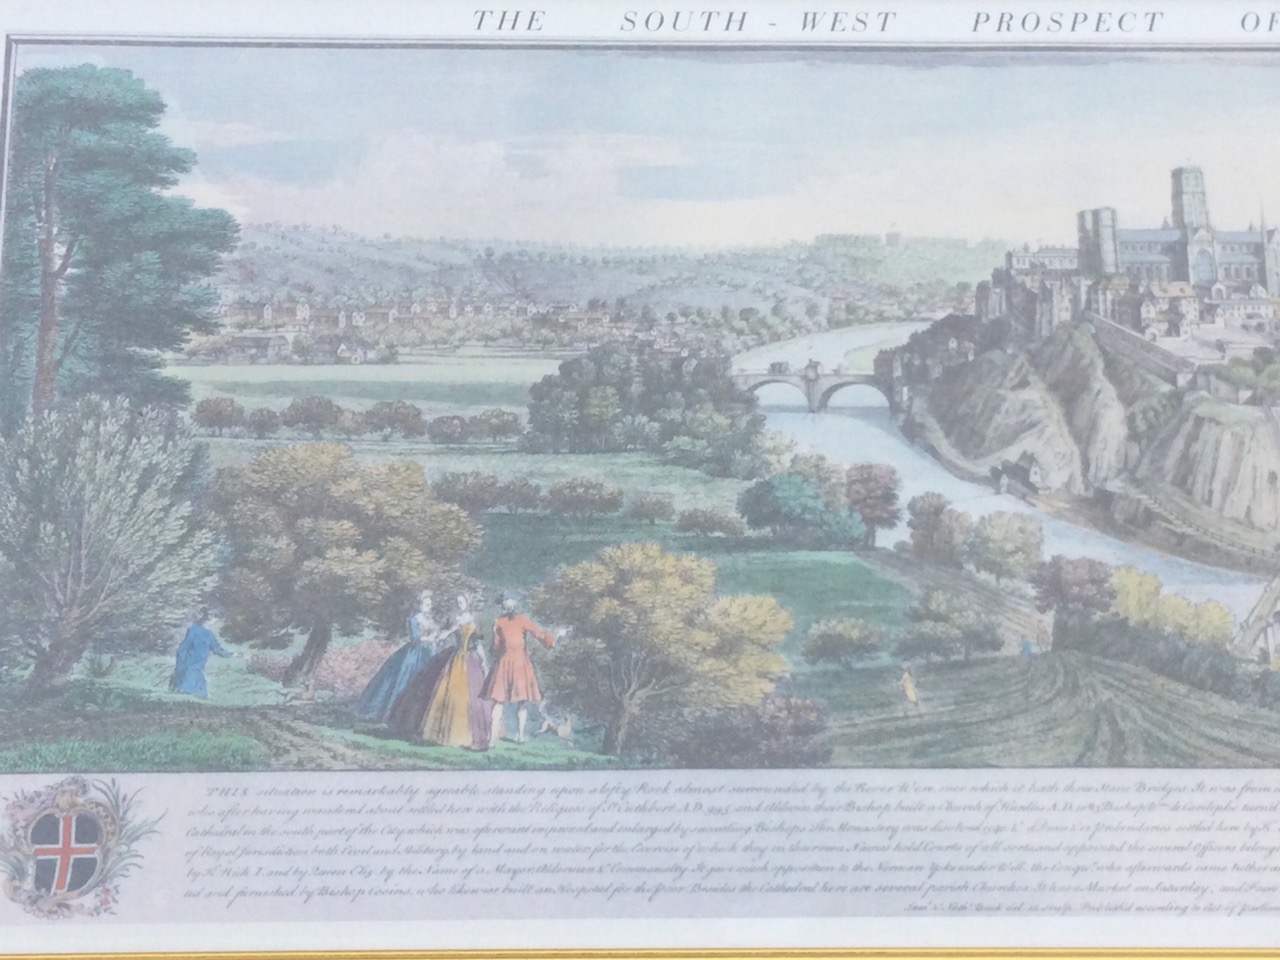 A reproduction landscape print, The South West Prospect of the City of Durham, the coloured plate - Bild 2 aus 3